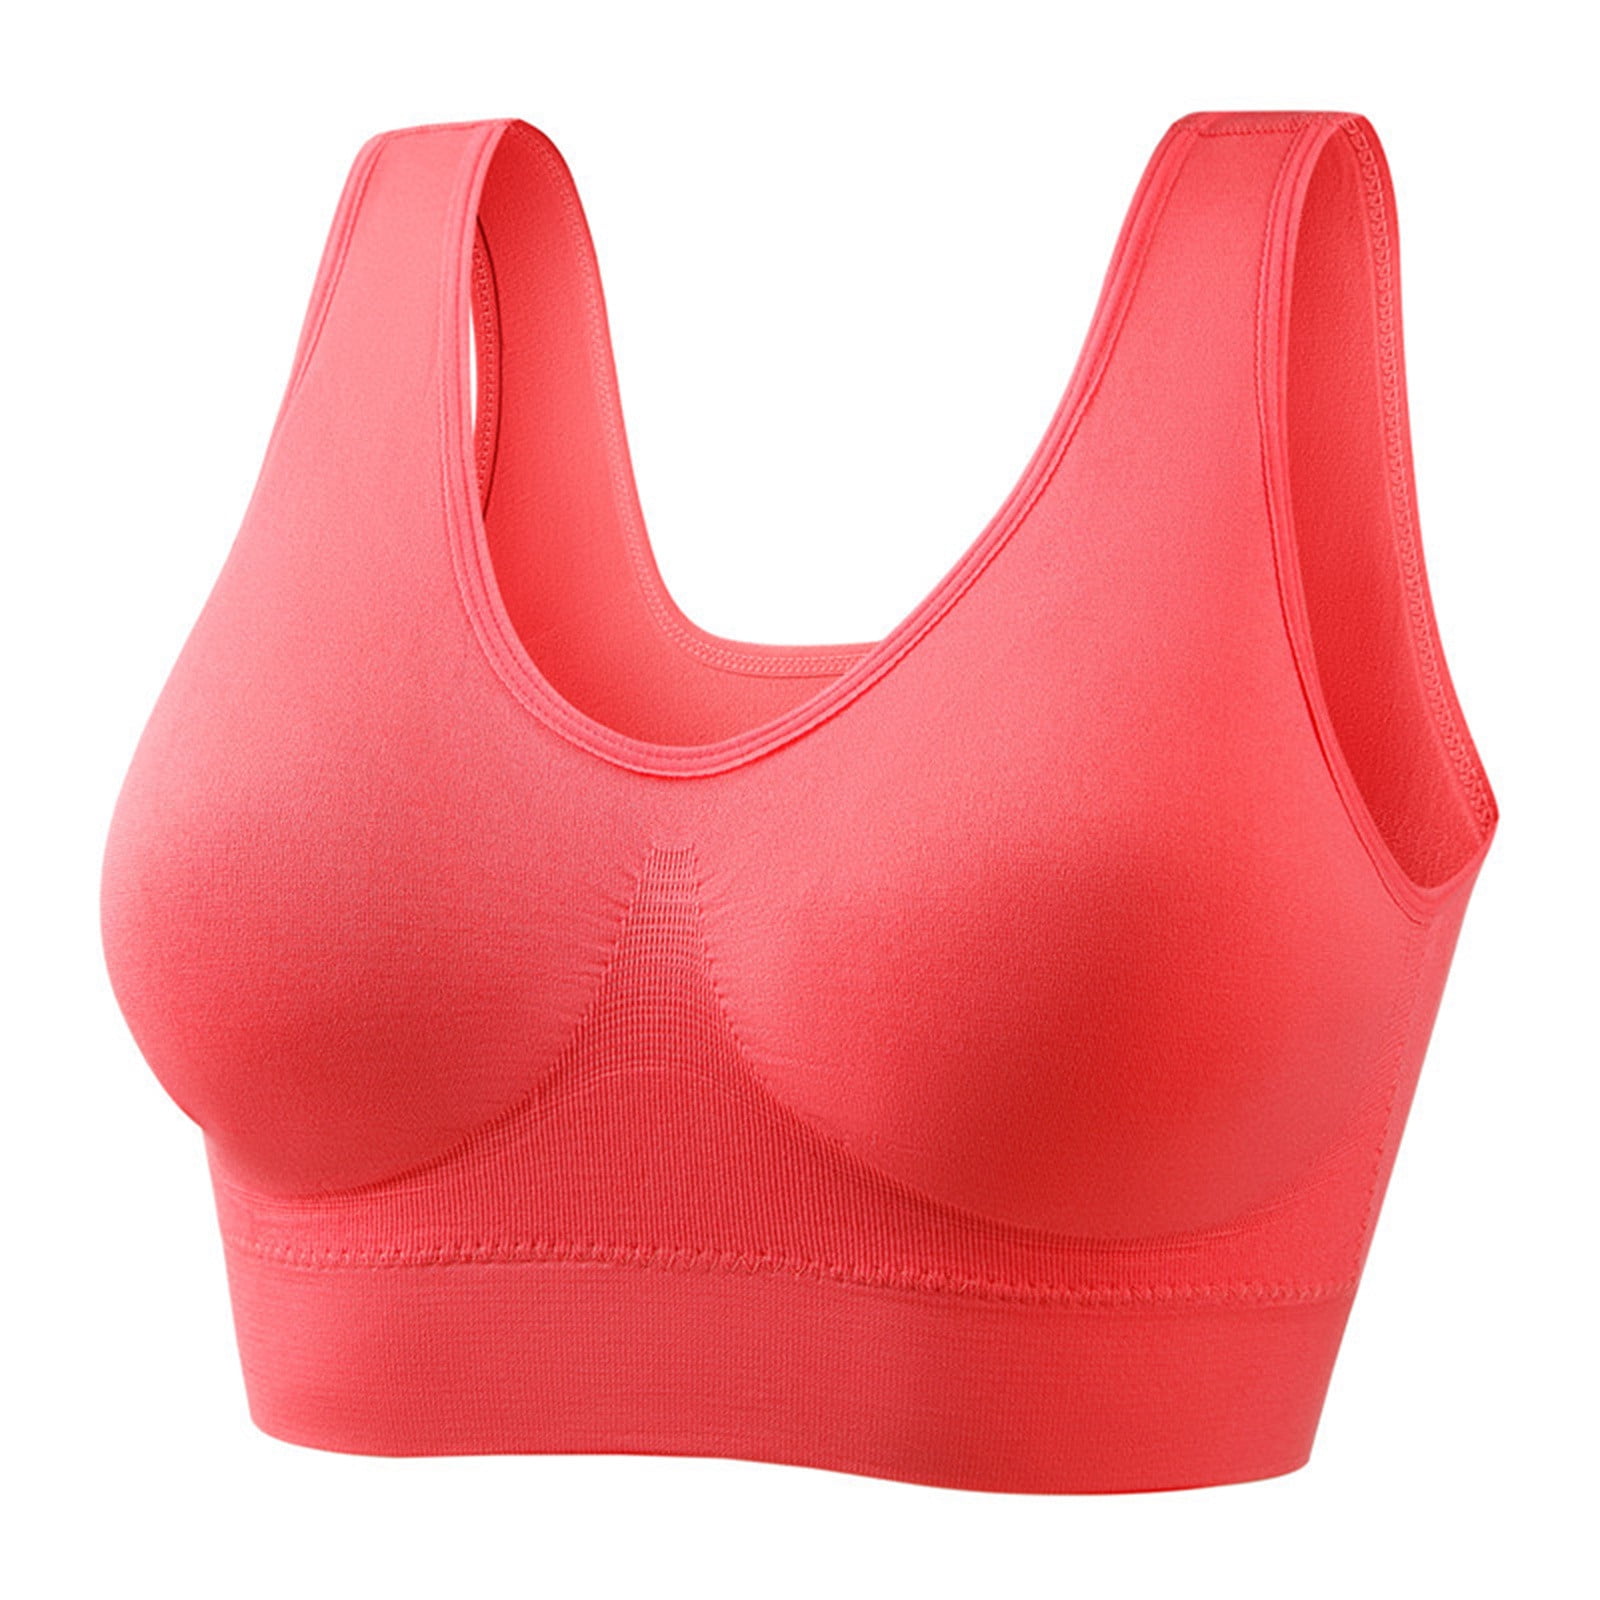 Knosfe Women's Sports Bras High Impact Racerback Mesh Wireless Bras with  Support and Lift Plus Size Bras Full Coverage T-Shirt Bra No Underwire  Light Blue S 